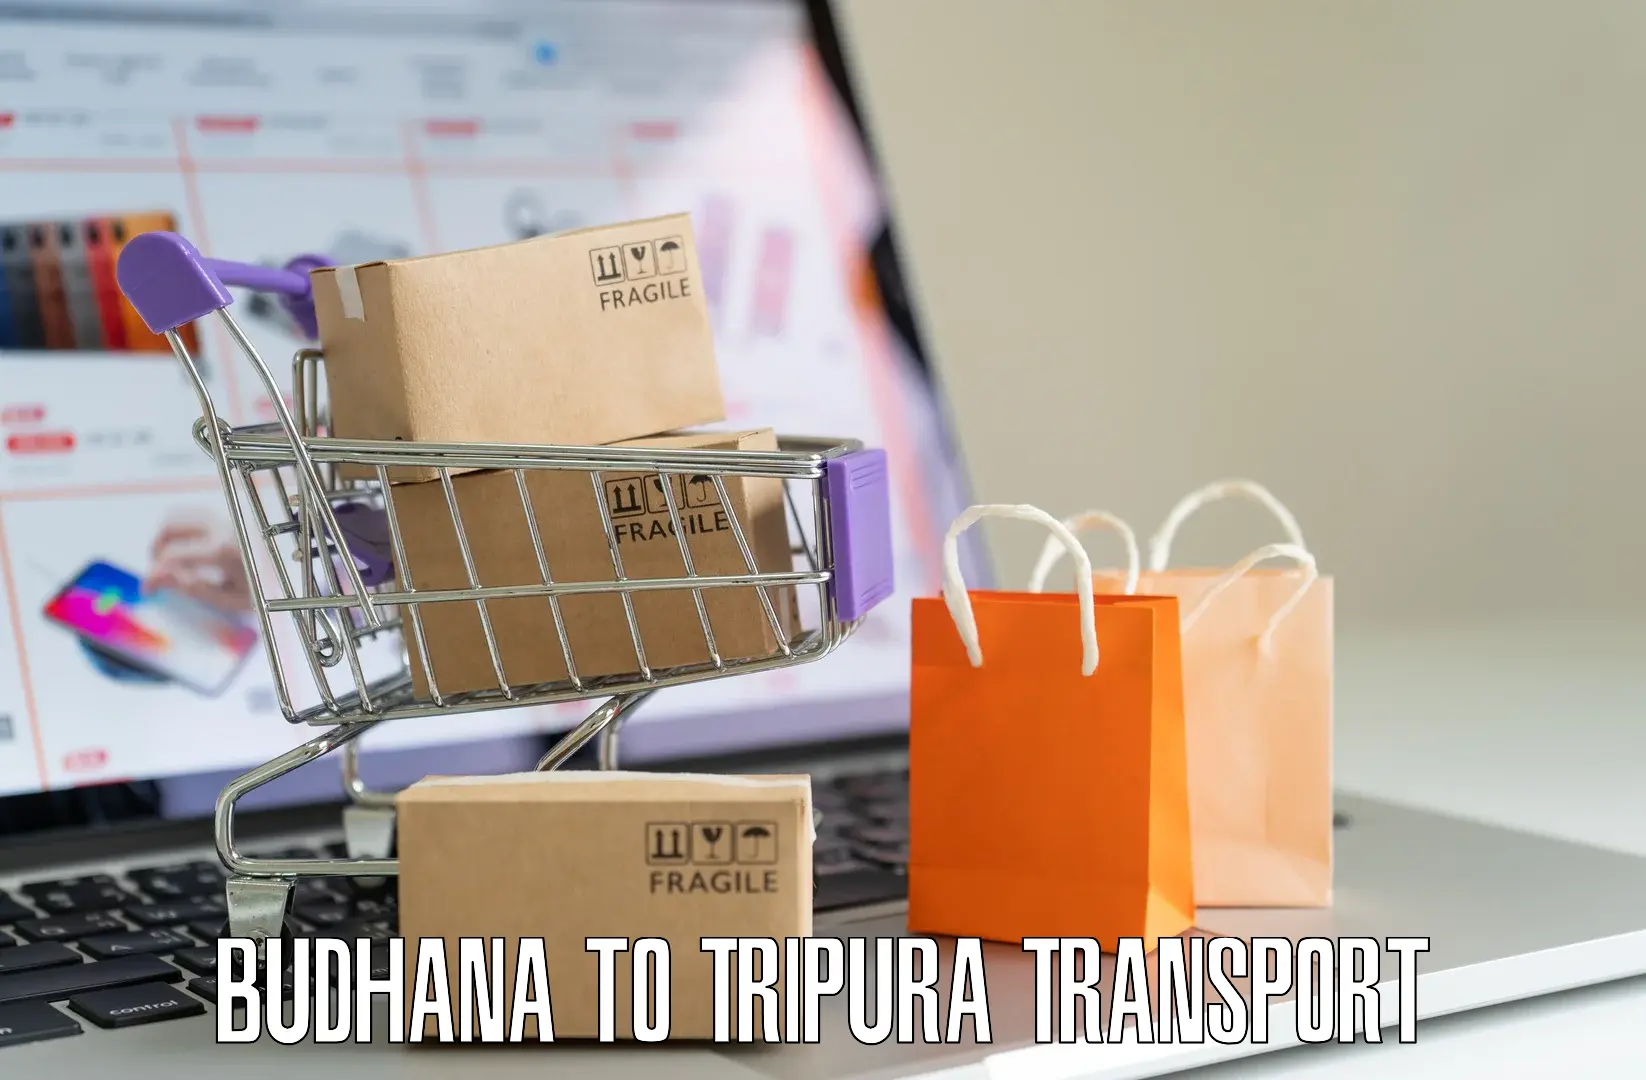 Nearby transport service Budhana to Manughat